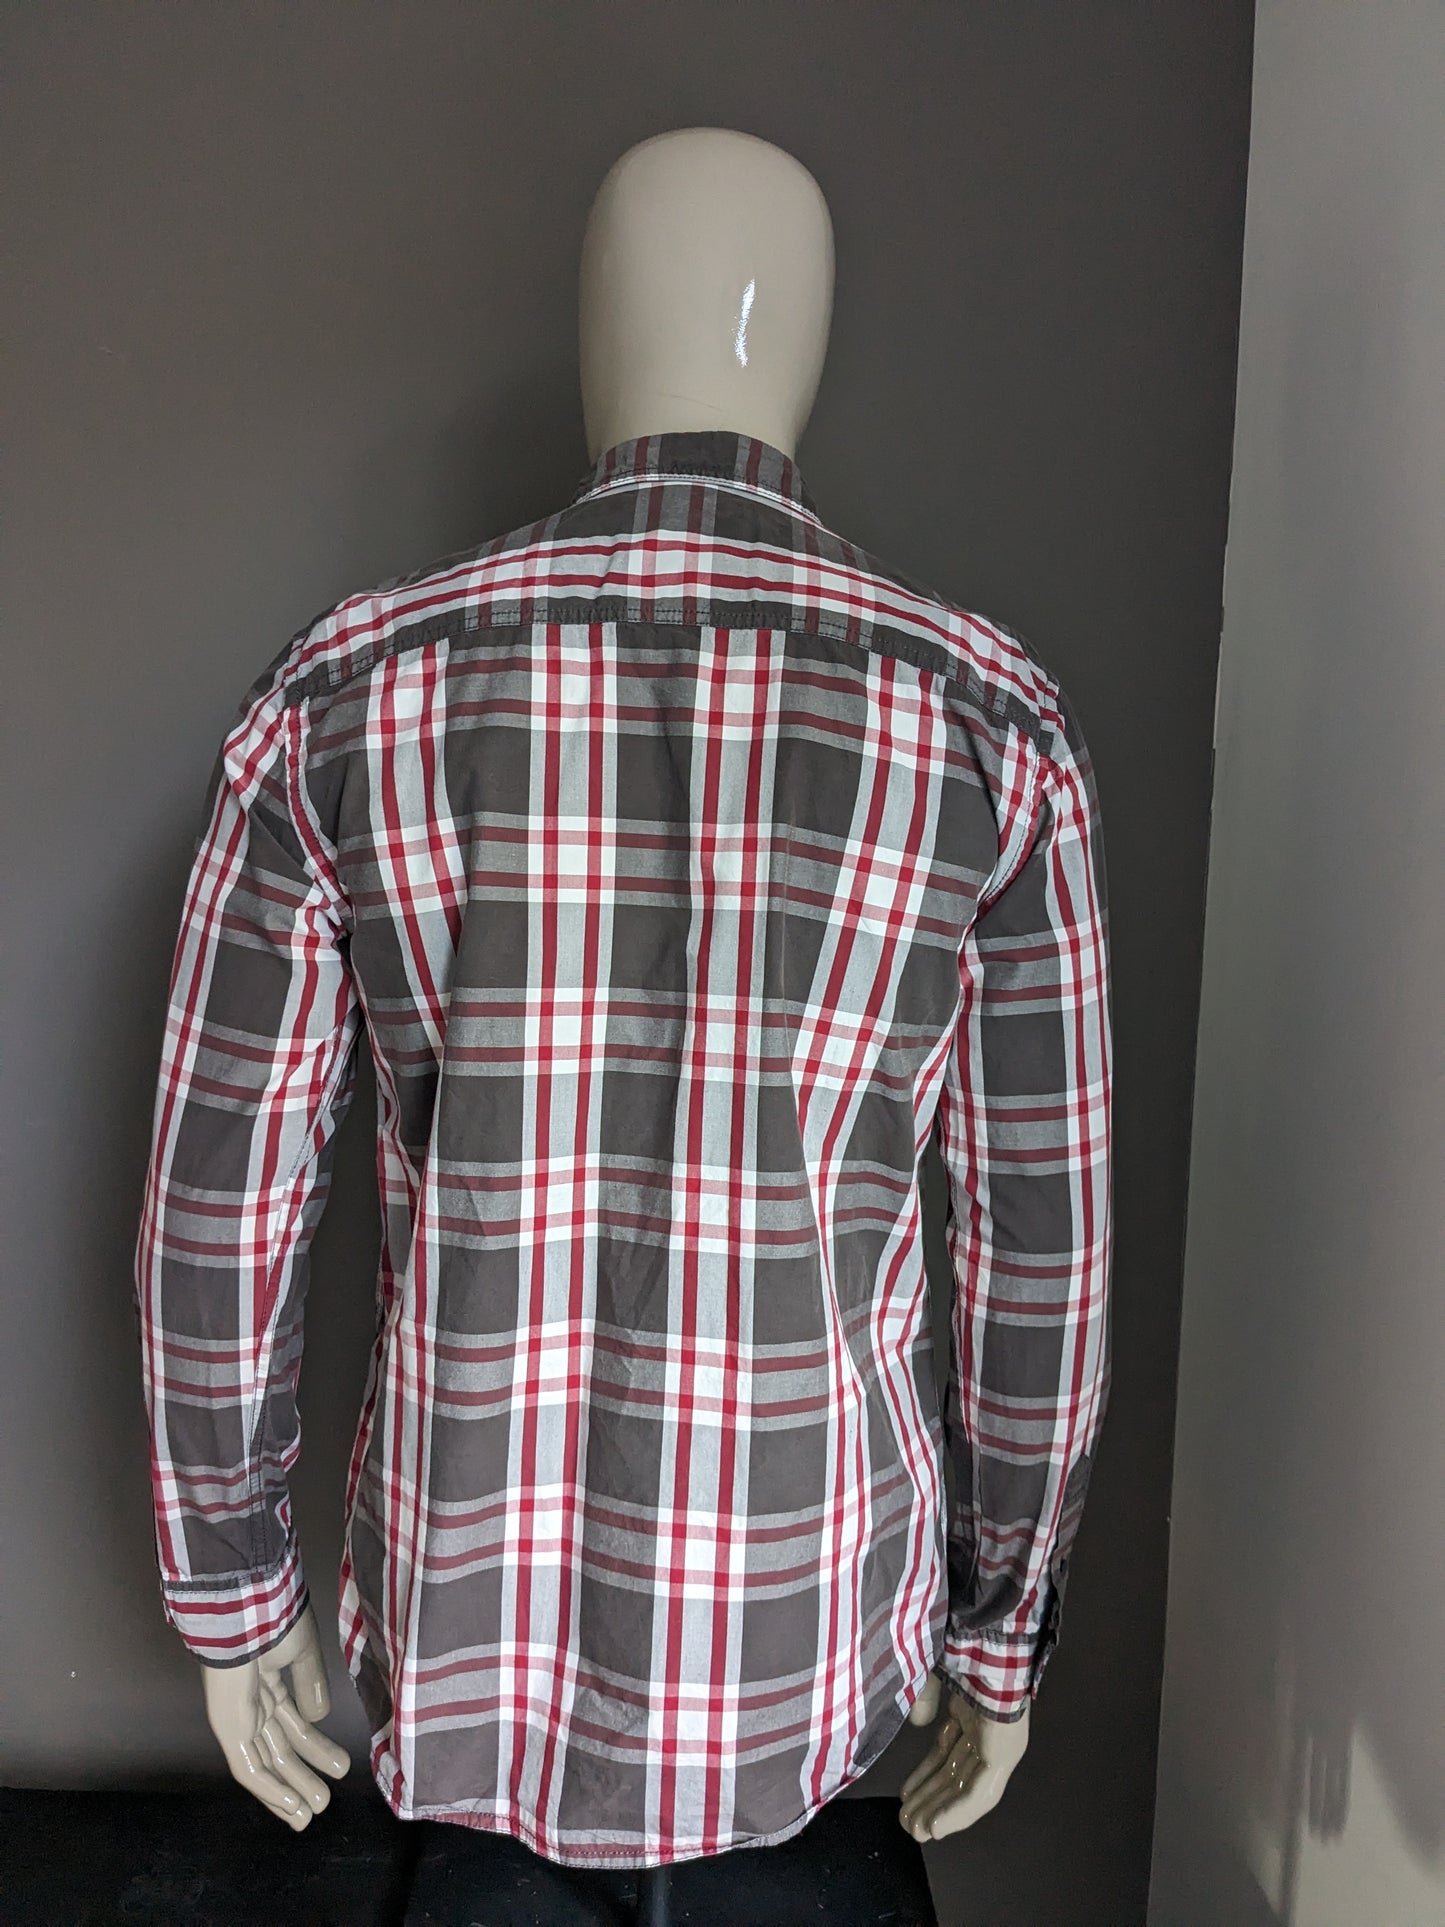 S.oliver Shirt. Brund Red White Checkered. Taille L. Slim Fit.